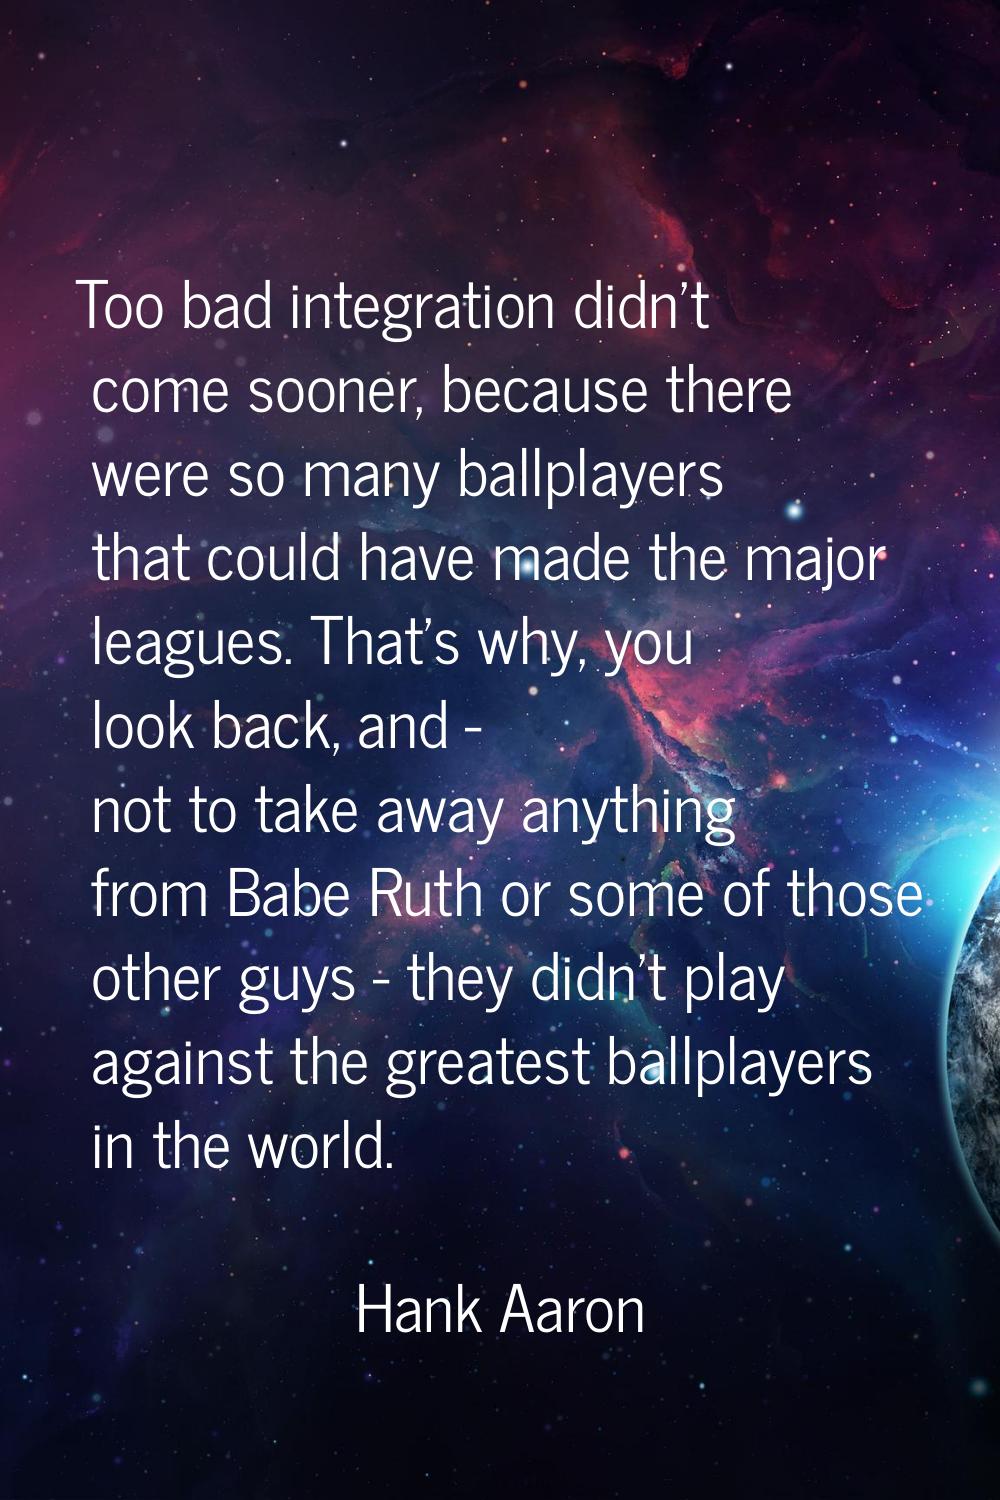 Too bad integration didn't come sooner, because there were so many ballplayers that could have made